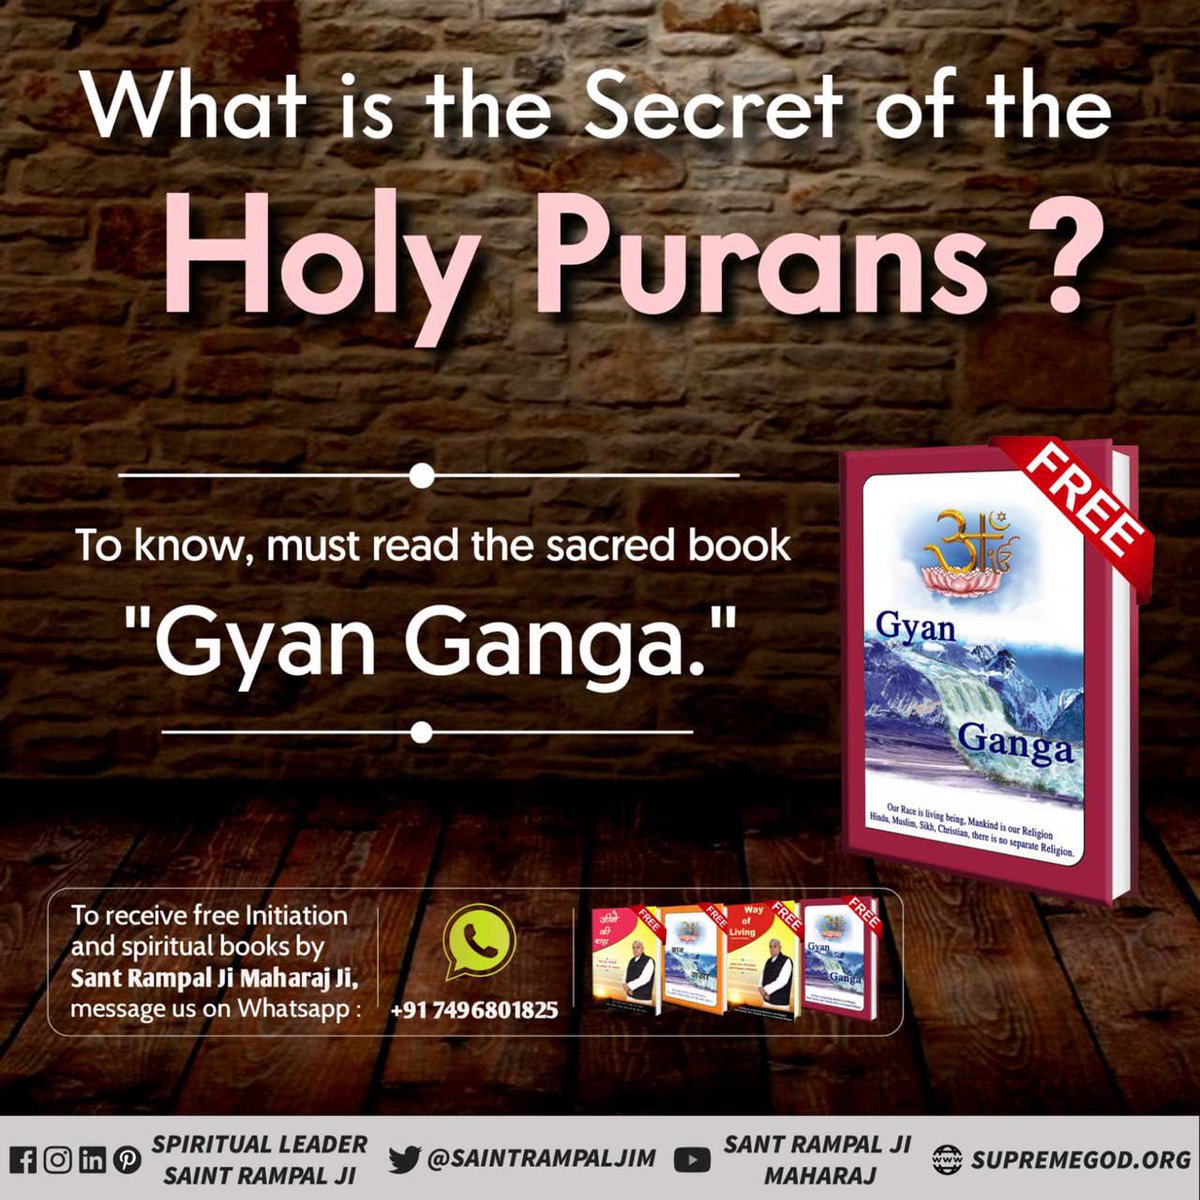 #GodMorningThursday
What is the Secret of the Holy Purans?
For More Information, must read the previous book 'Gyan Ganga''.
Visit Saint Rampal Ji Maharaj YouTube Channel for more information
#thursdayvibes